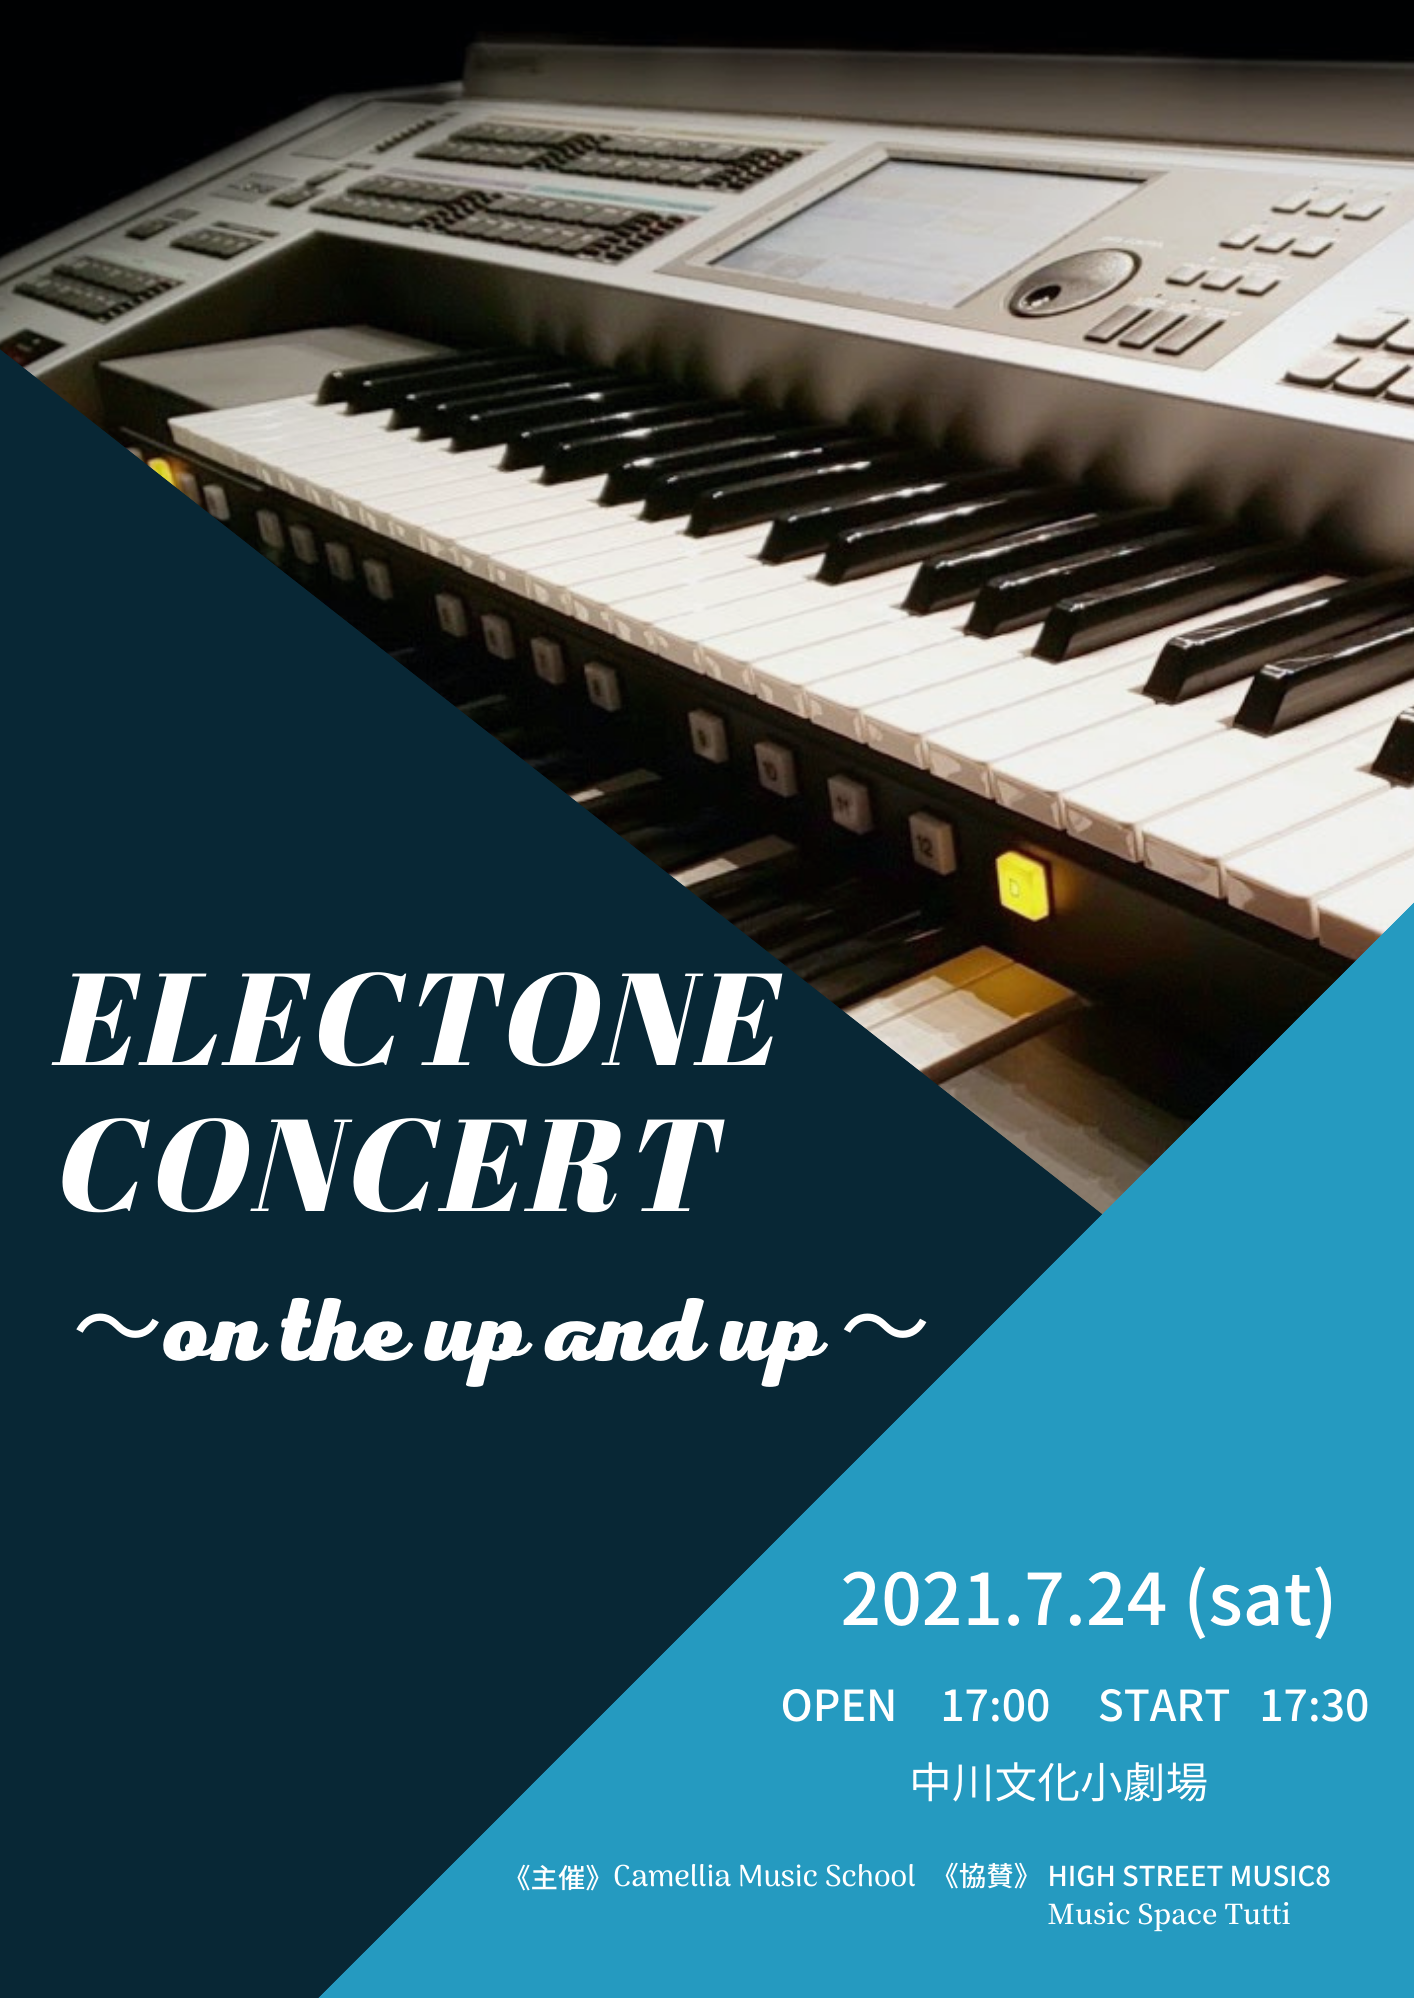 「ELECTONE CONCERT ～on the up and up～」開催しました 🎶